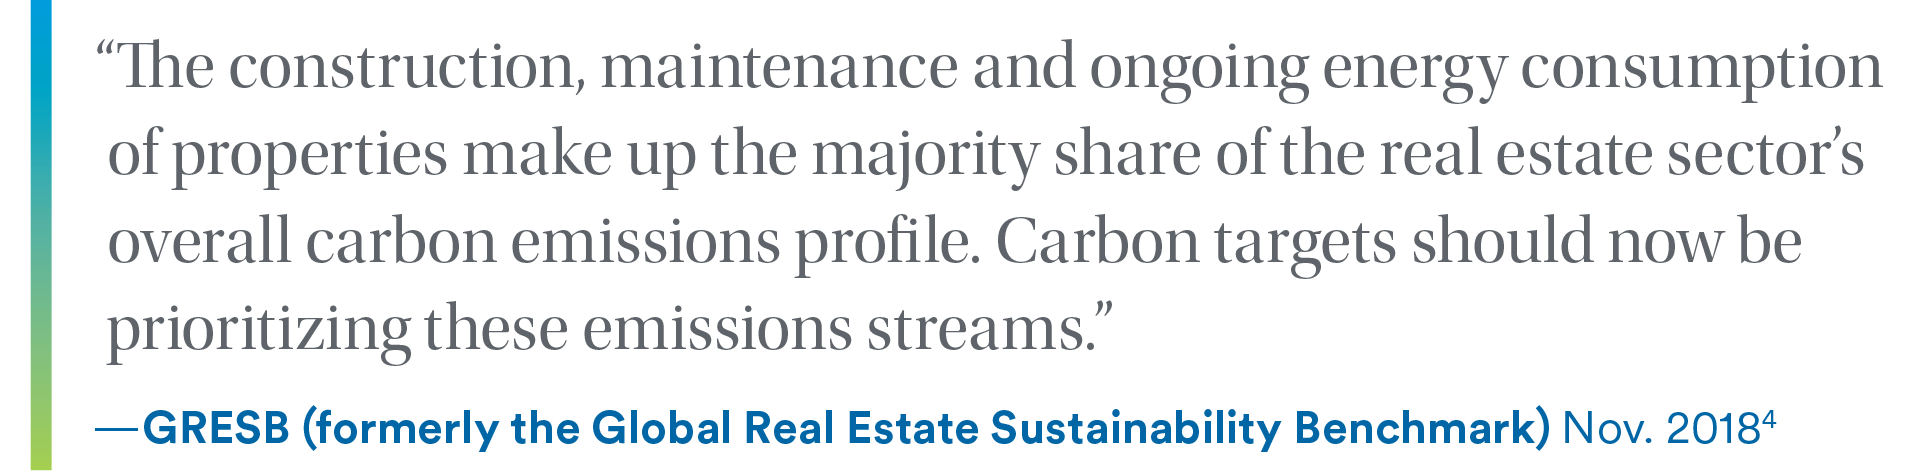 /></figure>
<!-- /wp:image -->

<!-- wp:paragraph -->
<p>In commercial real estate, a primary Scope 3 source of emissions are the building’s tenants, their activities, and their energy use. In the GHG Protocol, these are covered under category 13, “<a href=